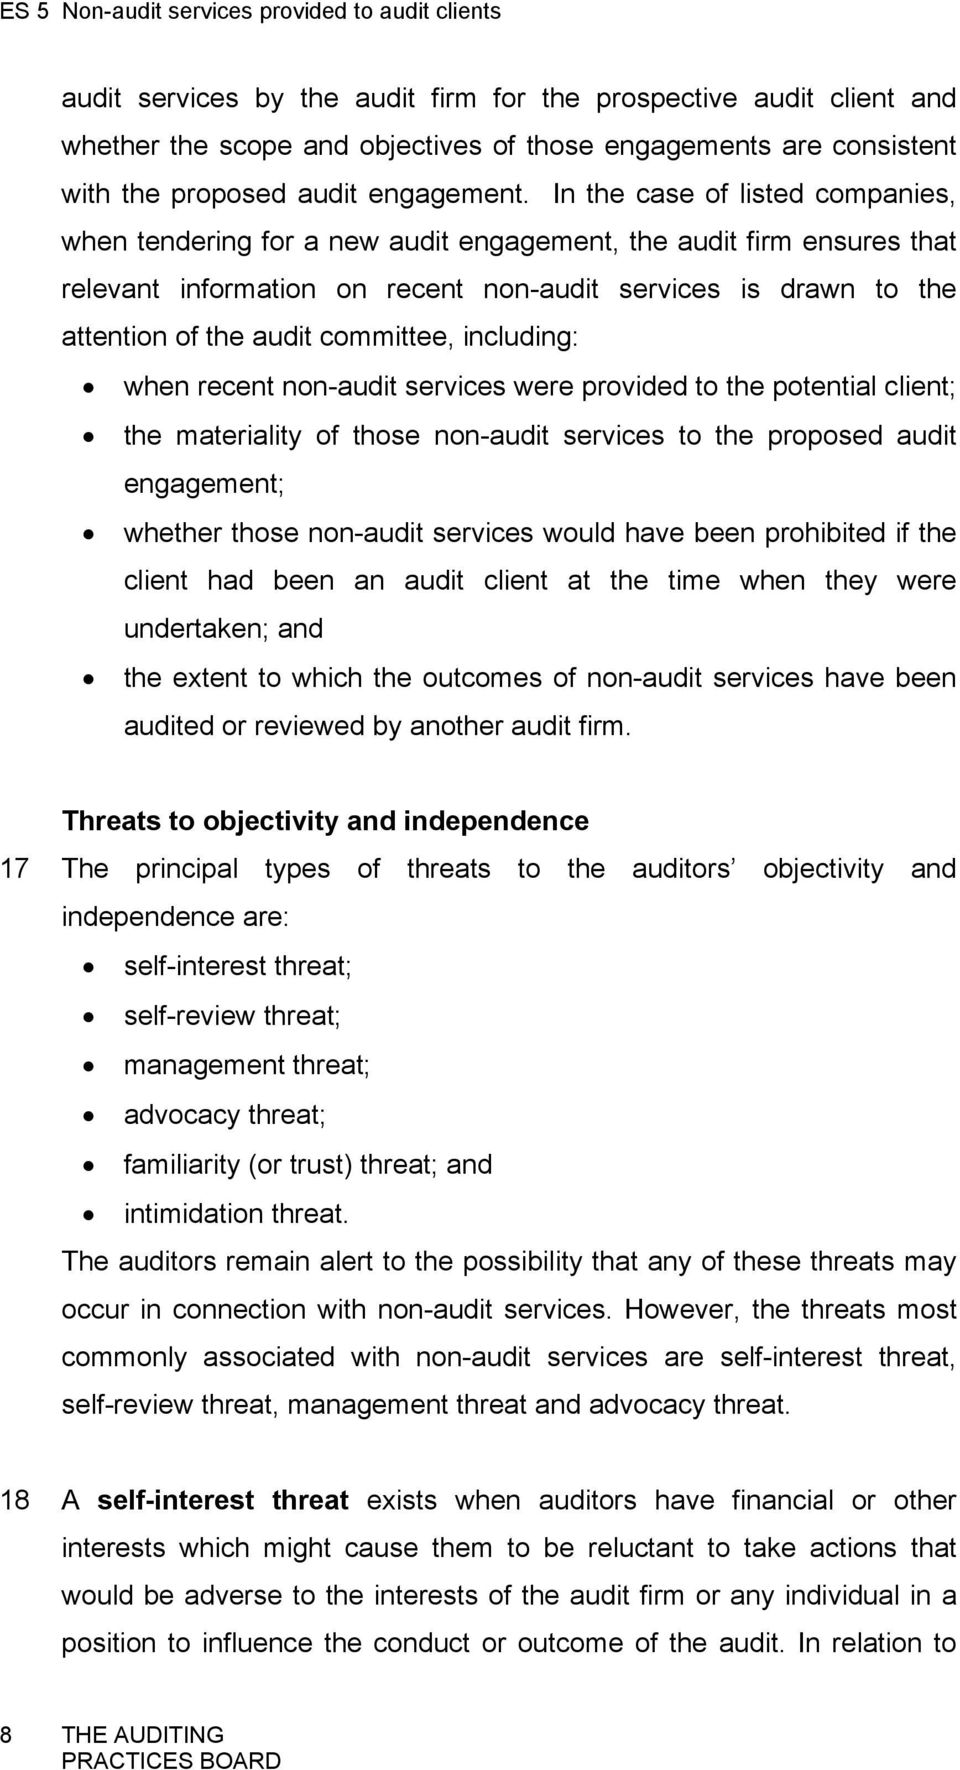 committee, including: when recent non-audit services were provided to the potential client; the materiality of those non-audit services to the proposed audit engagement; whether those non-audit